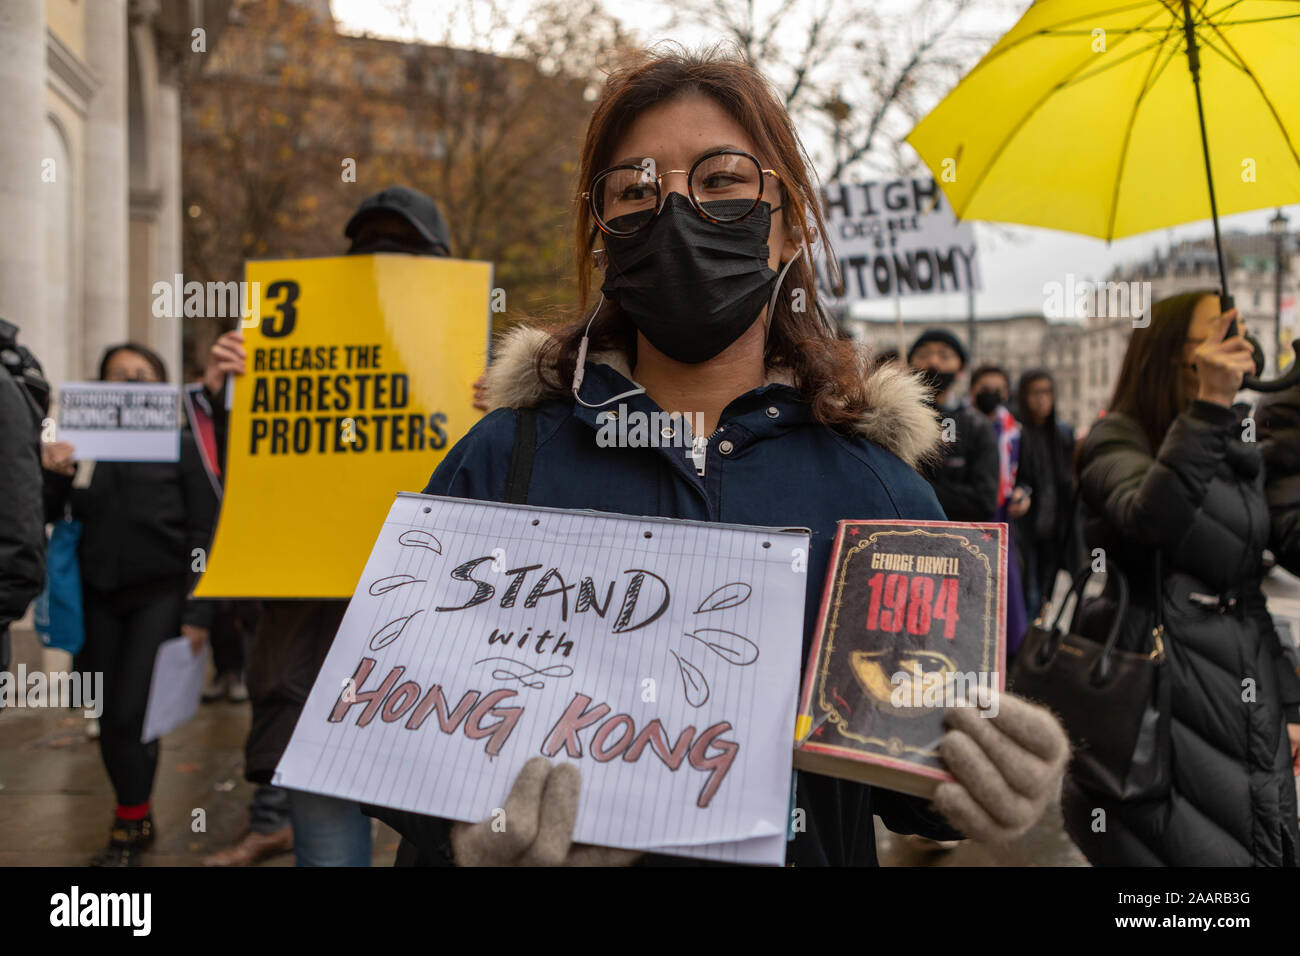 London, UK. 23rd Nov, 2019. Democracy for Hong Kong demonstration. The protesters are urging the UK Government to act on China's breaches of the Sino-British Joint Declaration, raise awareness of Hong Kong's humanitarian crisis and widespread injustices and erosion of autonomy in the city. Penelope Barritt/Alamy Live News Stock Photo